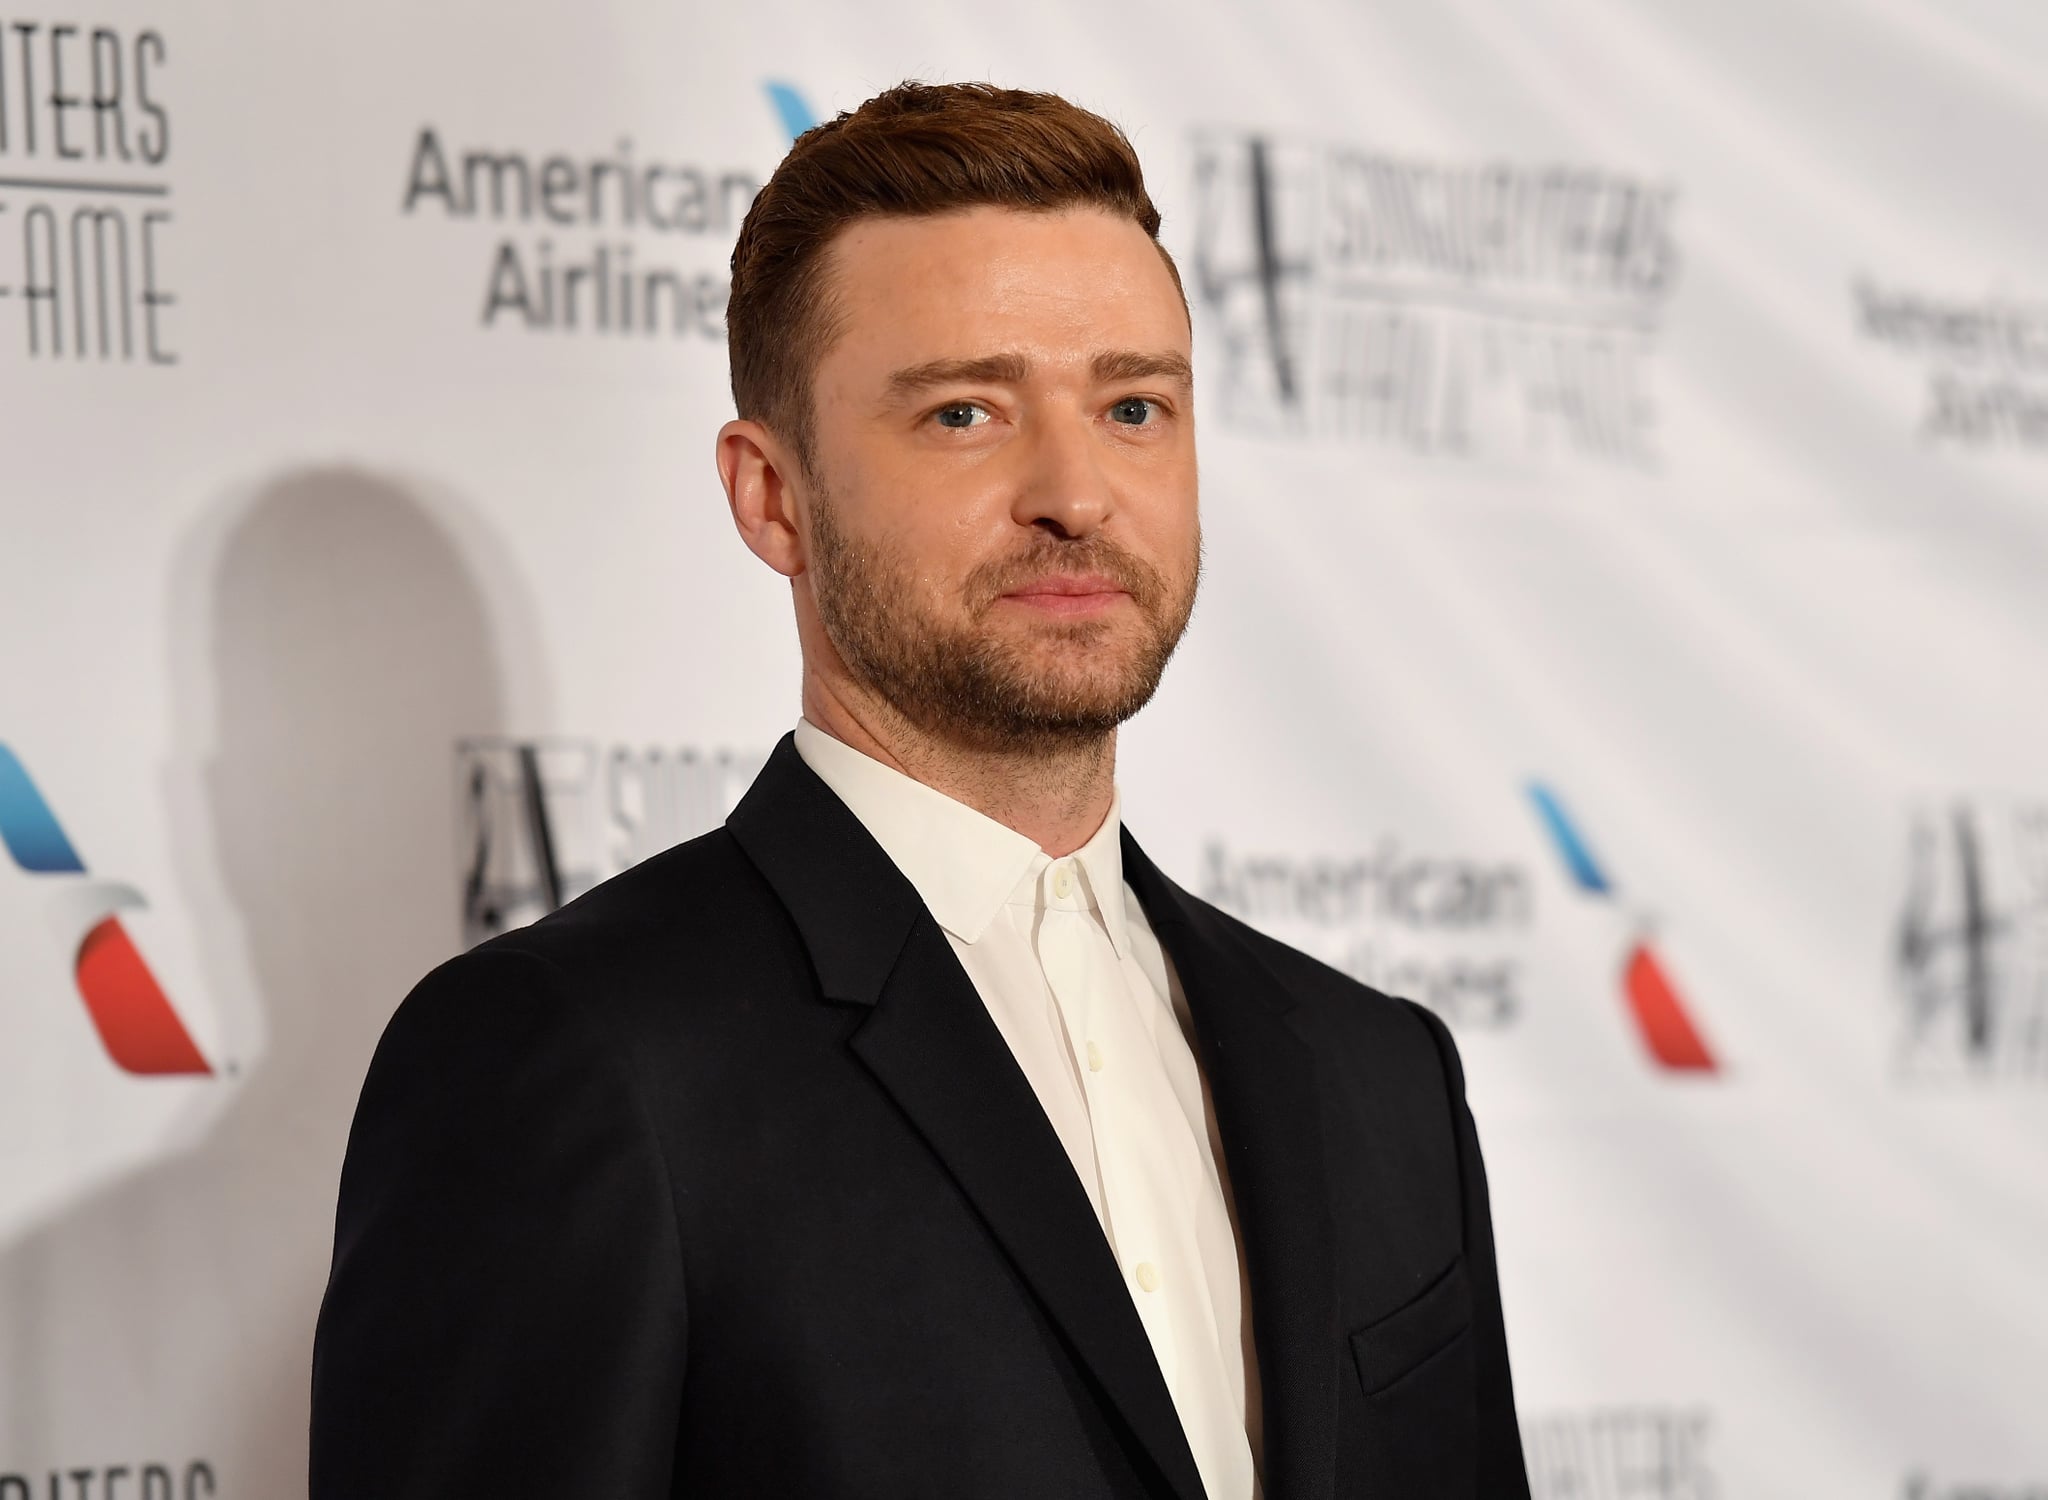 US singer-songwriter Justin Timberlake attends the 2019 Songwriters Hall Of Fame Gala at The New York Marriott Marquis on June 13, 2019 in New York City. (Photo by Angela Weiss / AFP)        (Photo credit should read ANGELA WEISS/AFP via Getty Images)